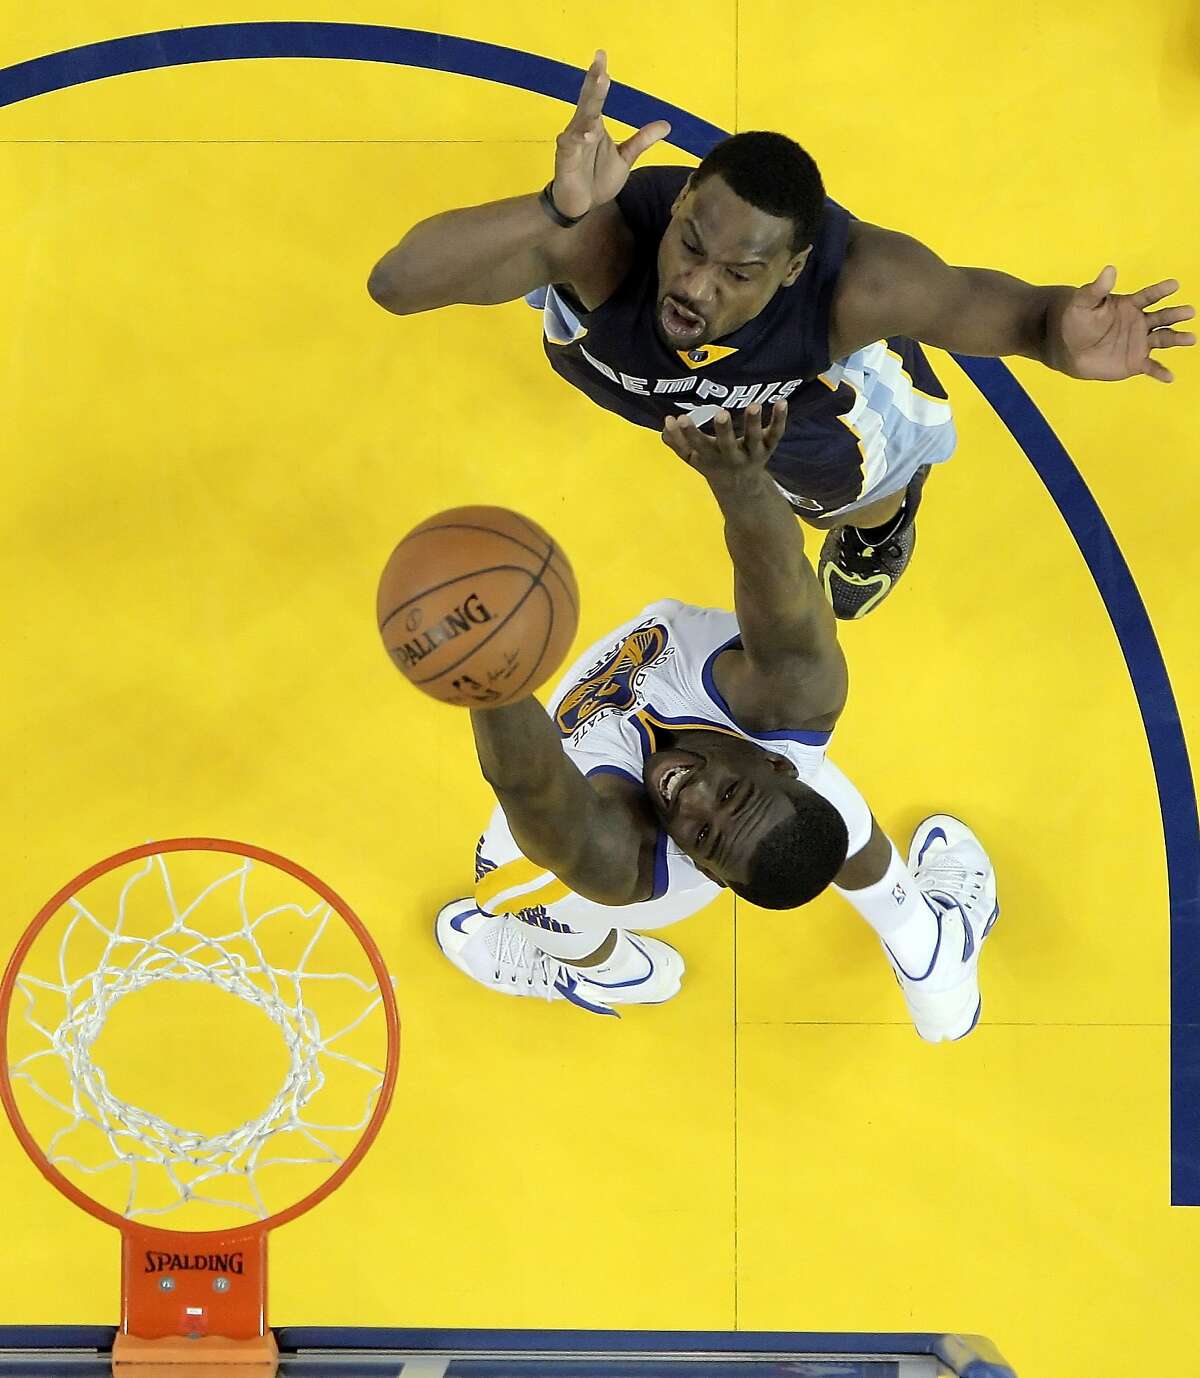 Draymond Green (23) defends against a shot by Tony Allen (9) during the second half. The Golden State Warriors played the Memphis Grizzlies at Oracle Arena in Oakland, Calif., in Game 1 of the Western Conference Semifinals on Sunday, May 3, 2015.